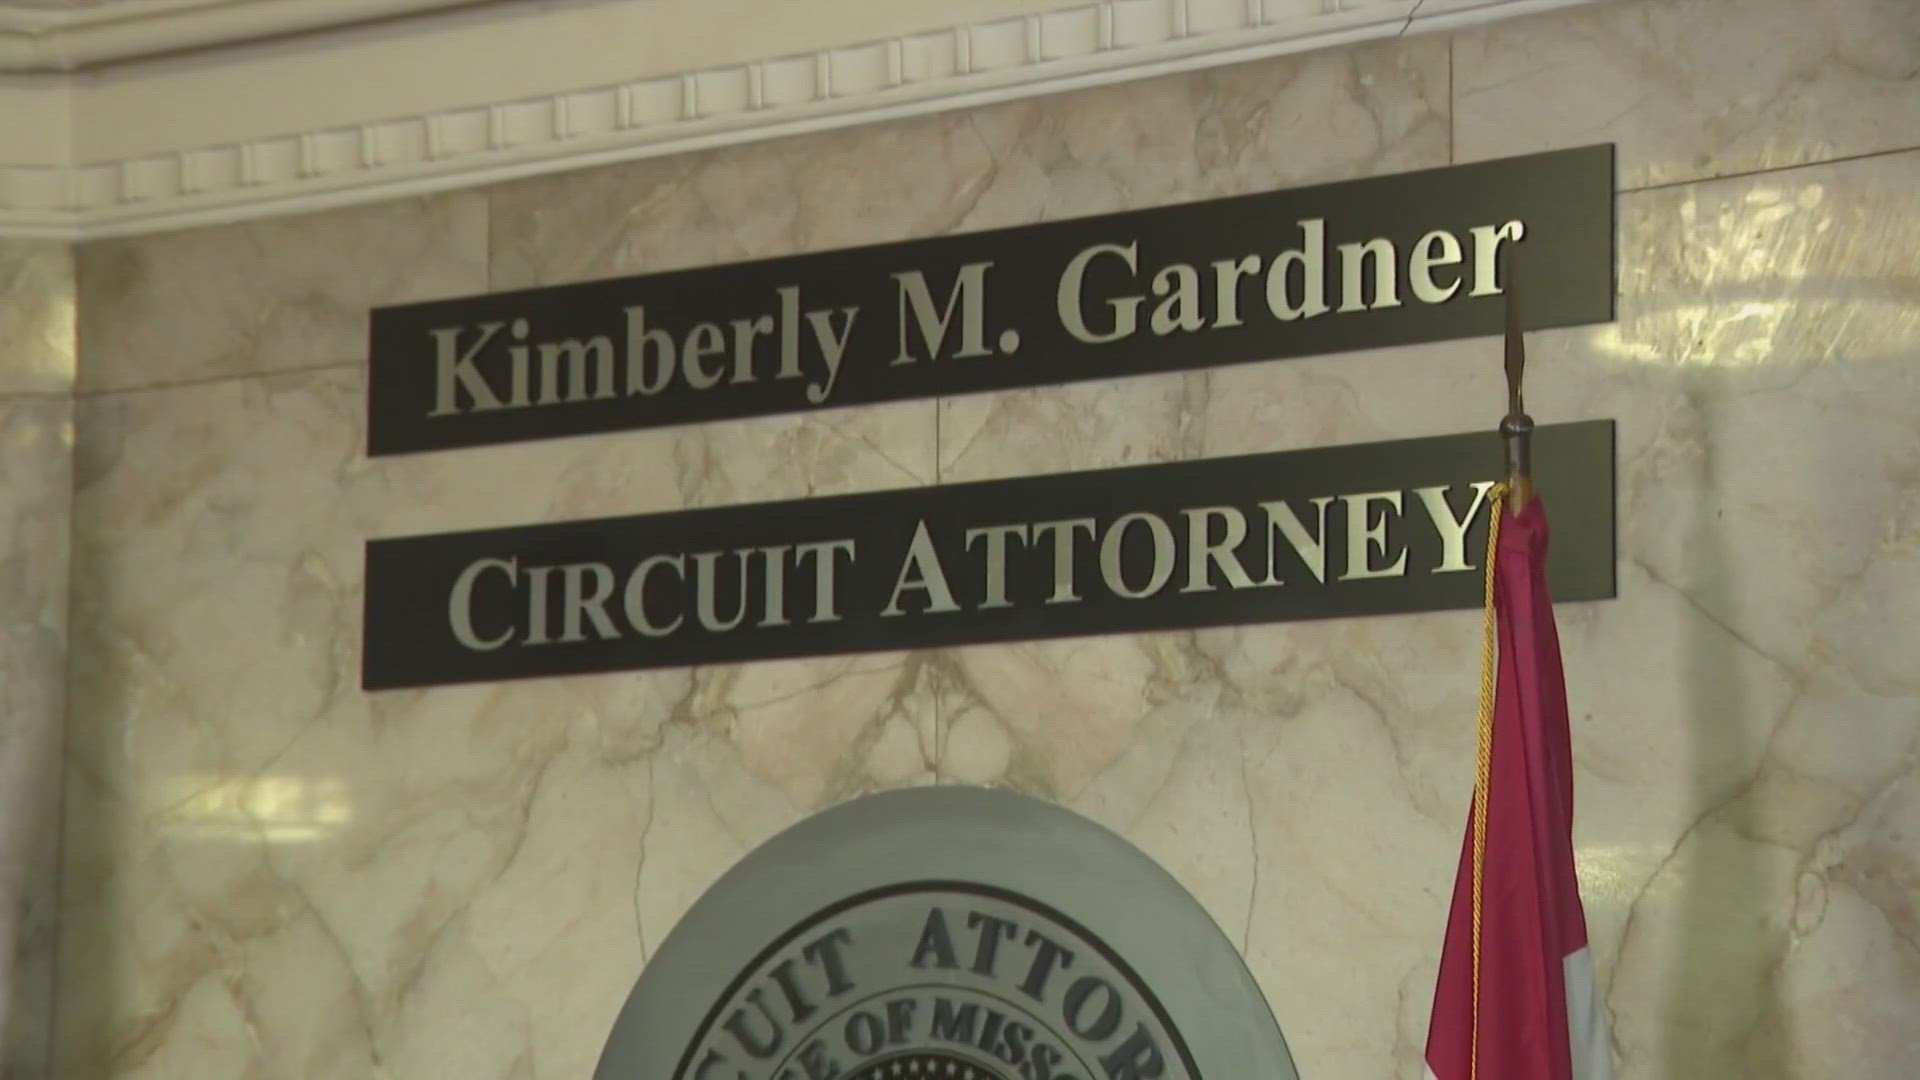 St. Louis Circuit Attorney Kim Gardner responded just hours ago. The response comes a week before she is scheduled to appear in court.